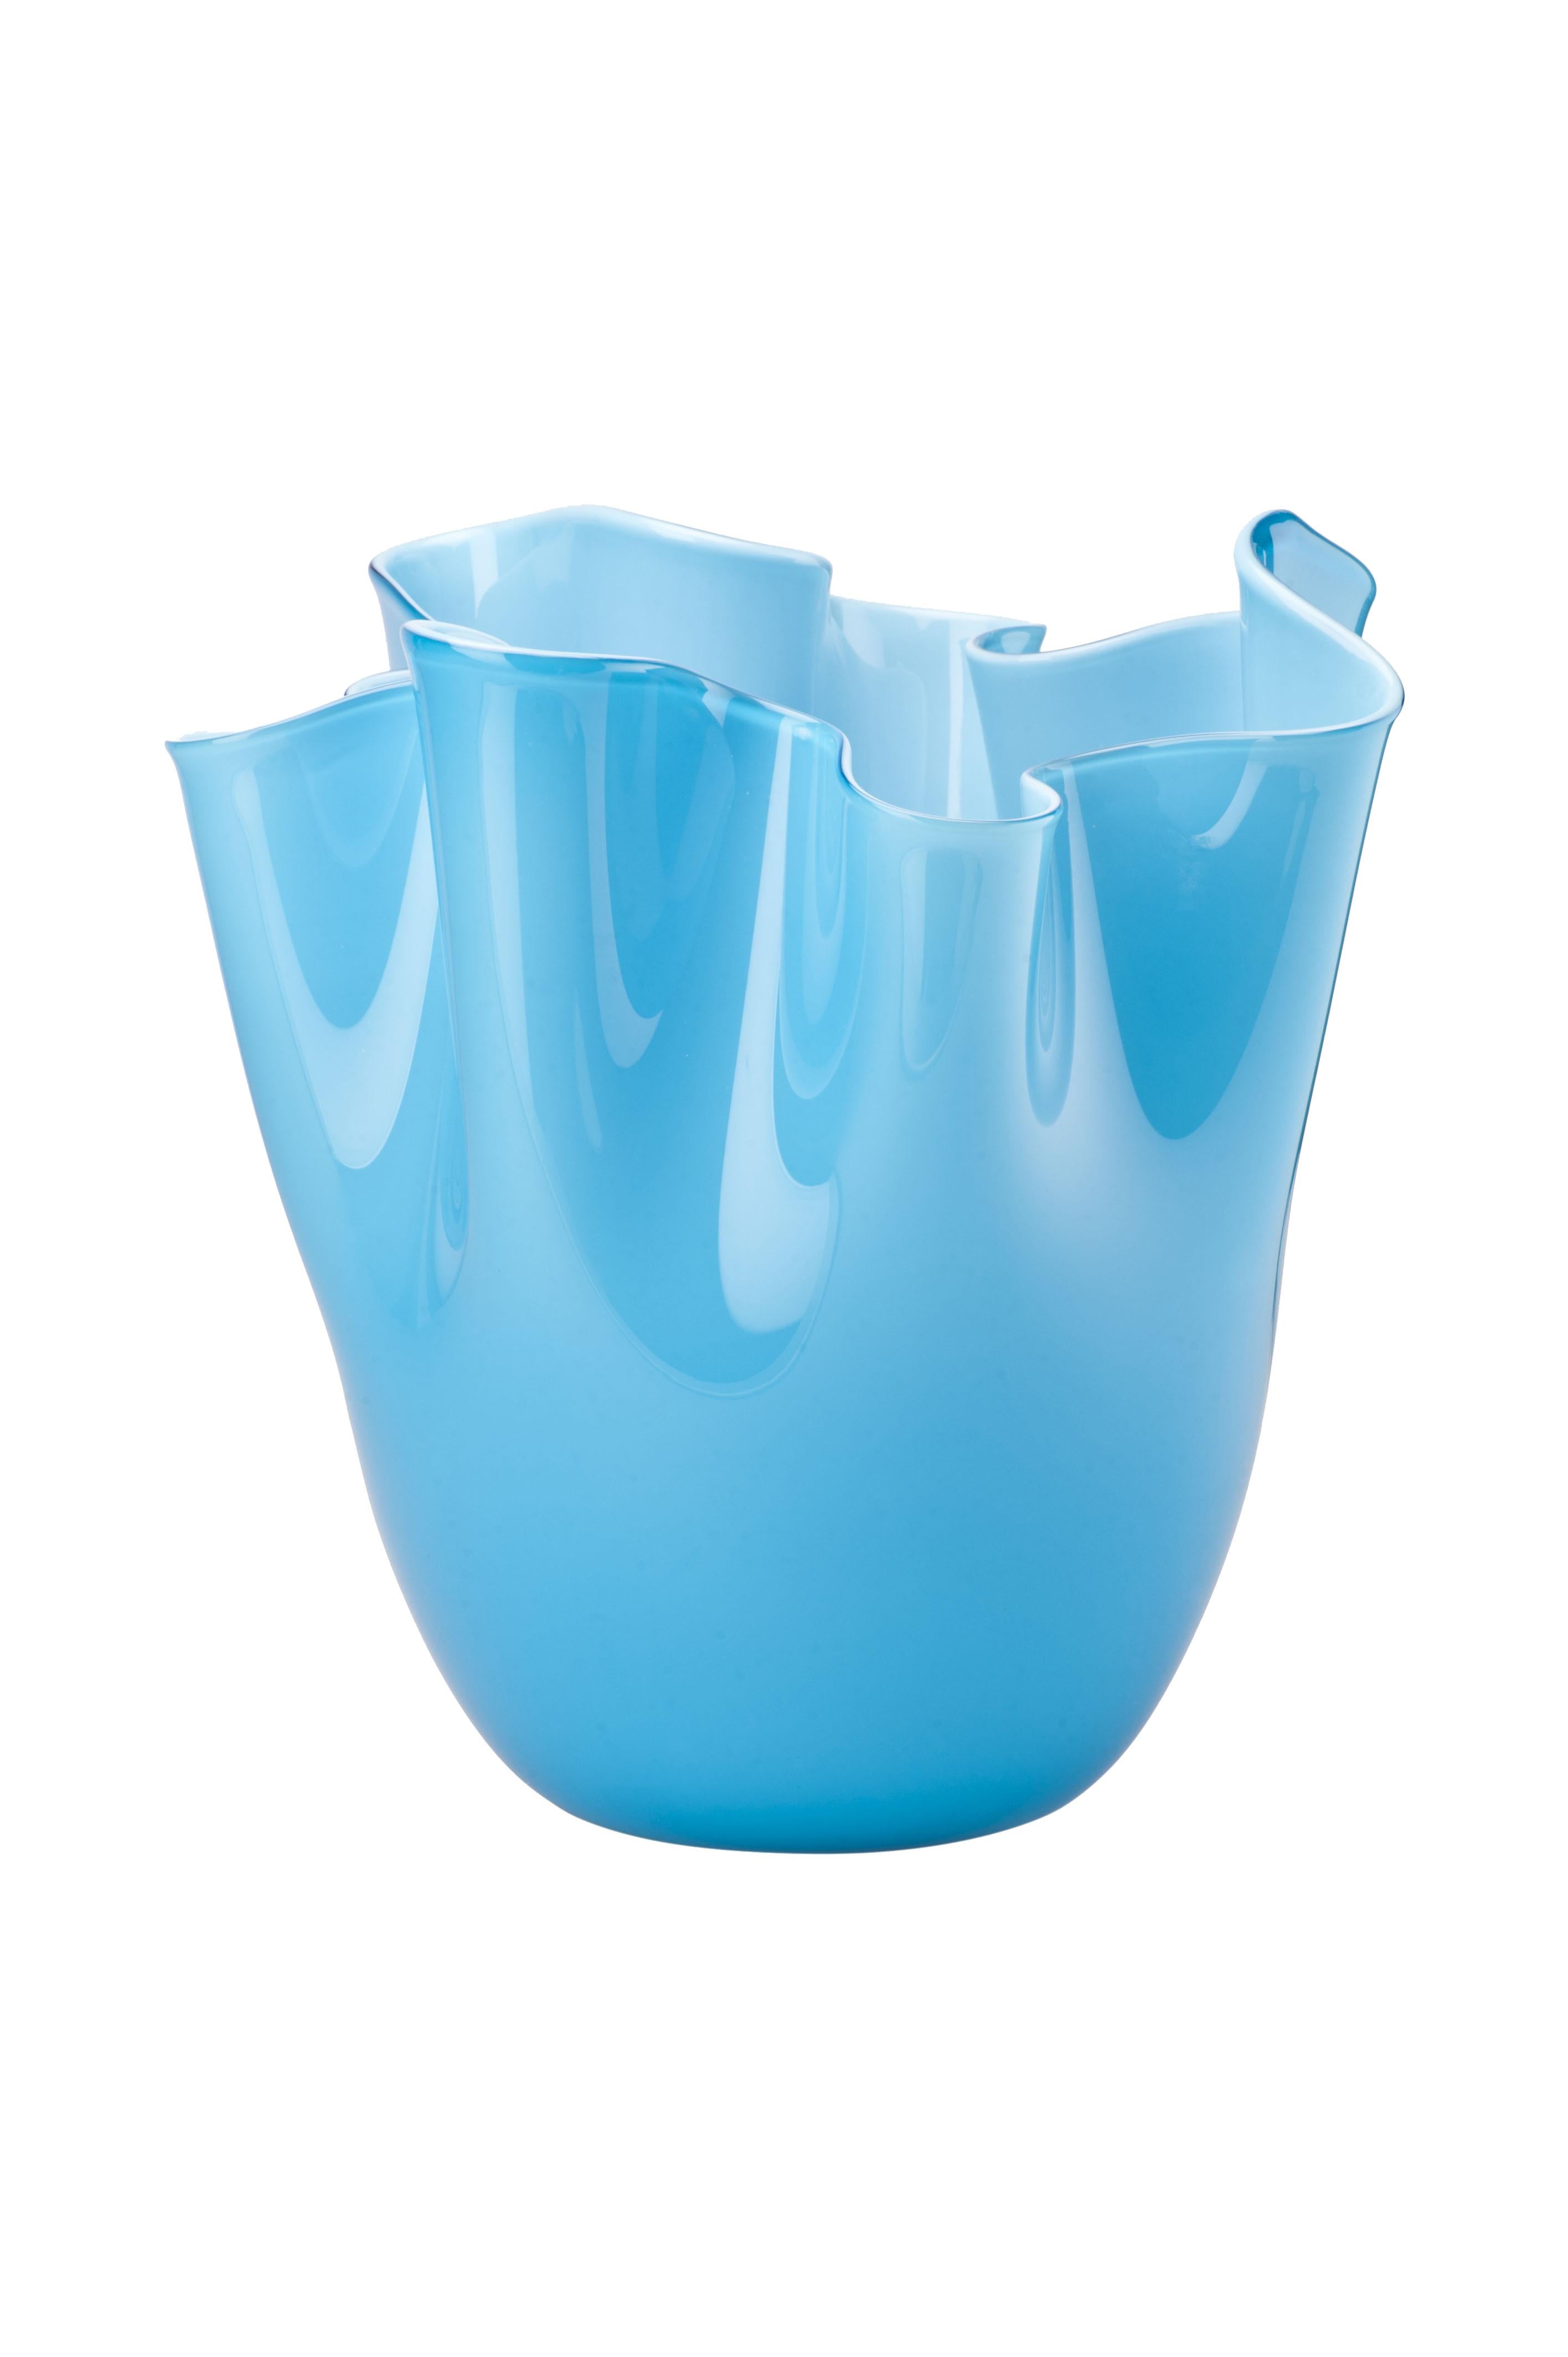 Venini glass vase with pinched rim in aquamarine designed by Fulvio Bianconi and Paolo Venini in 1948. Perfect for indoor home decor as container, vide-poche or statement piece for any room. Also available in other colors on 1stdibs. 

Dimensions: